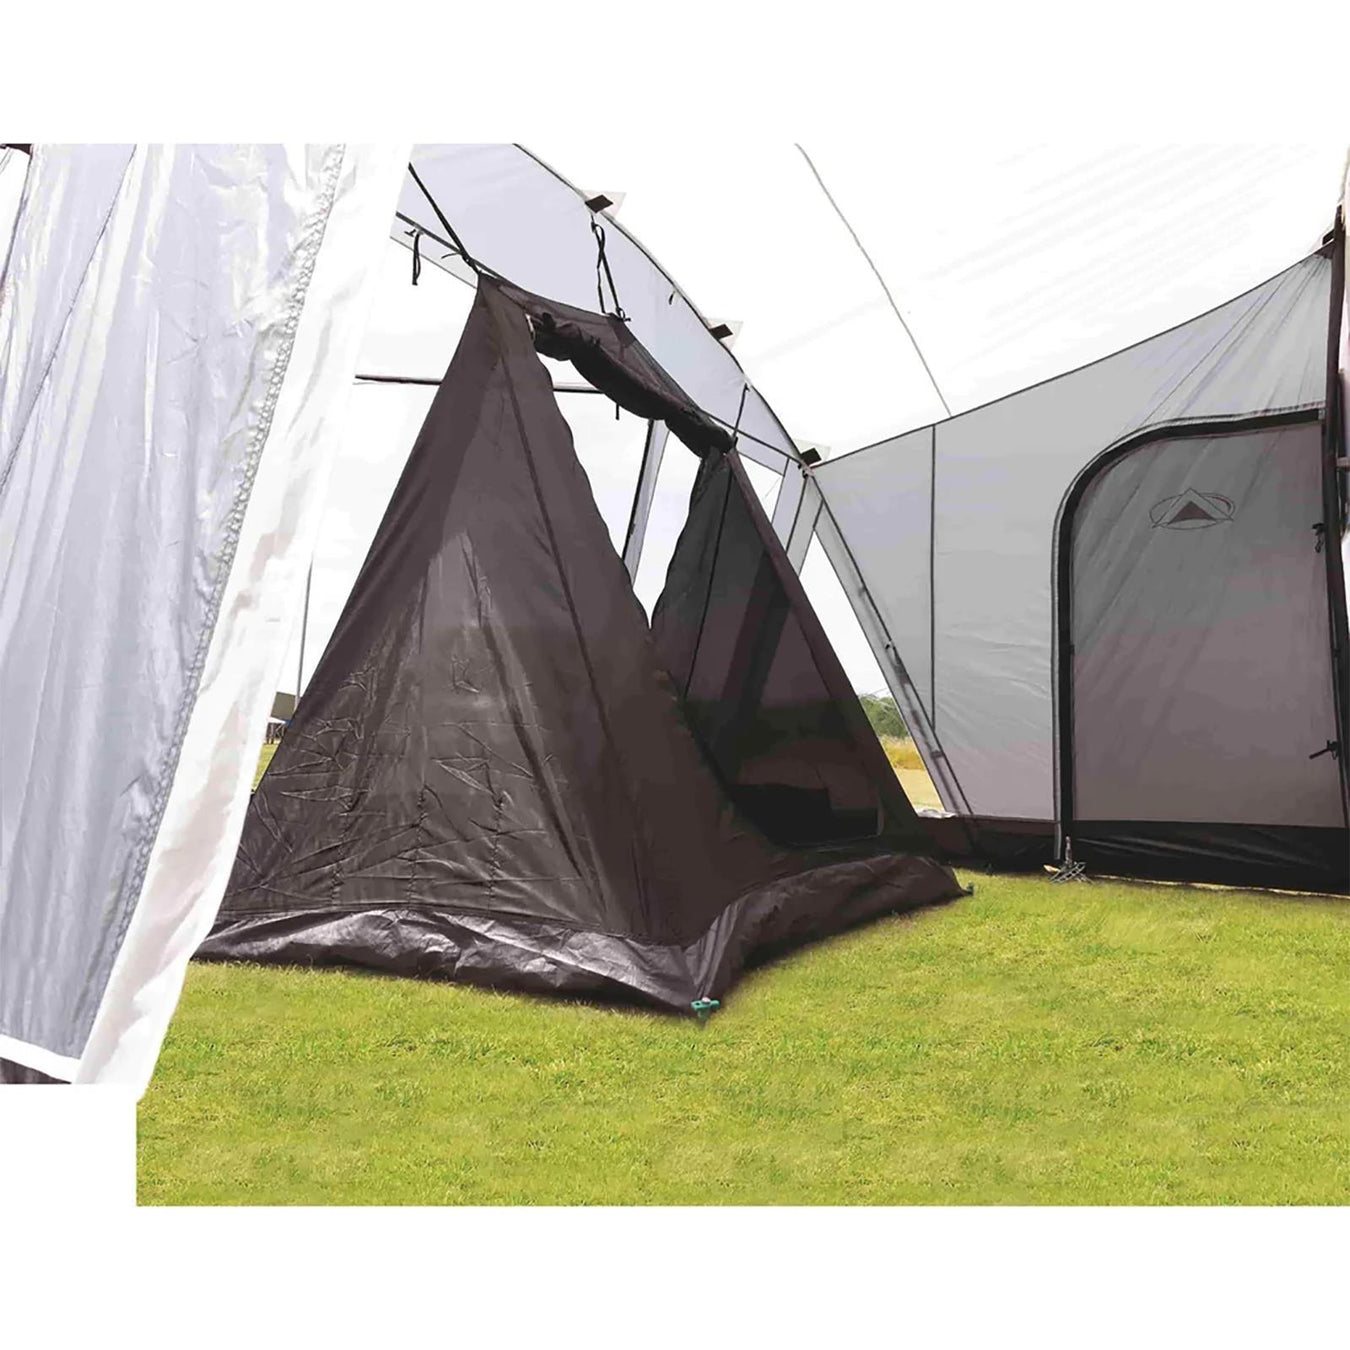 SunnCamp Swift / Dash Two Berth Inner Tent Awning Breathable SF1905 UK Camping And Leisure